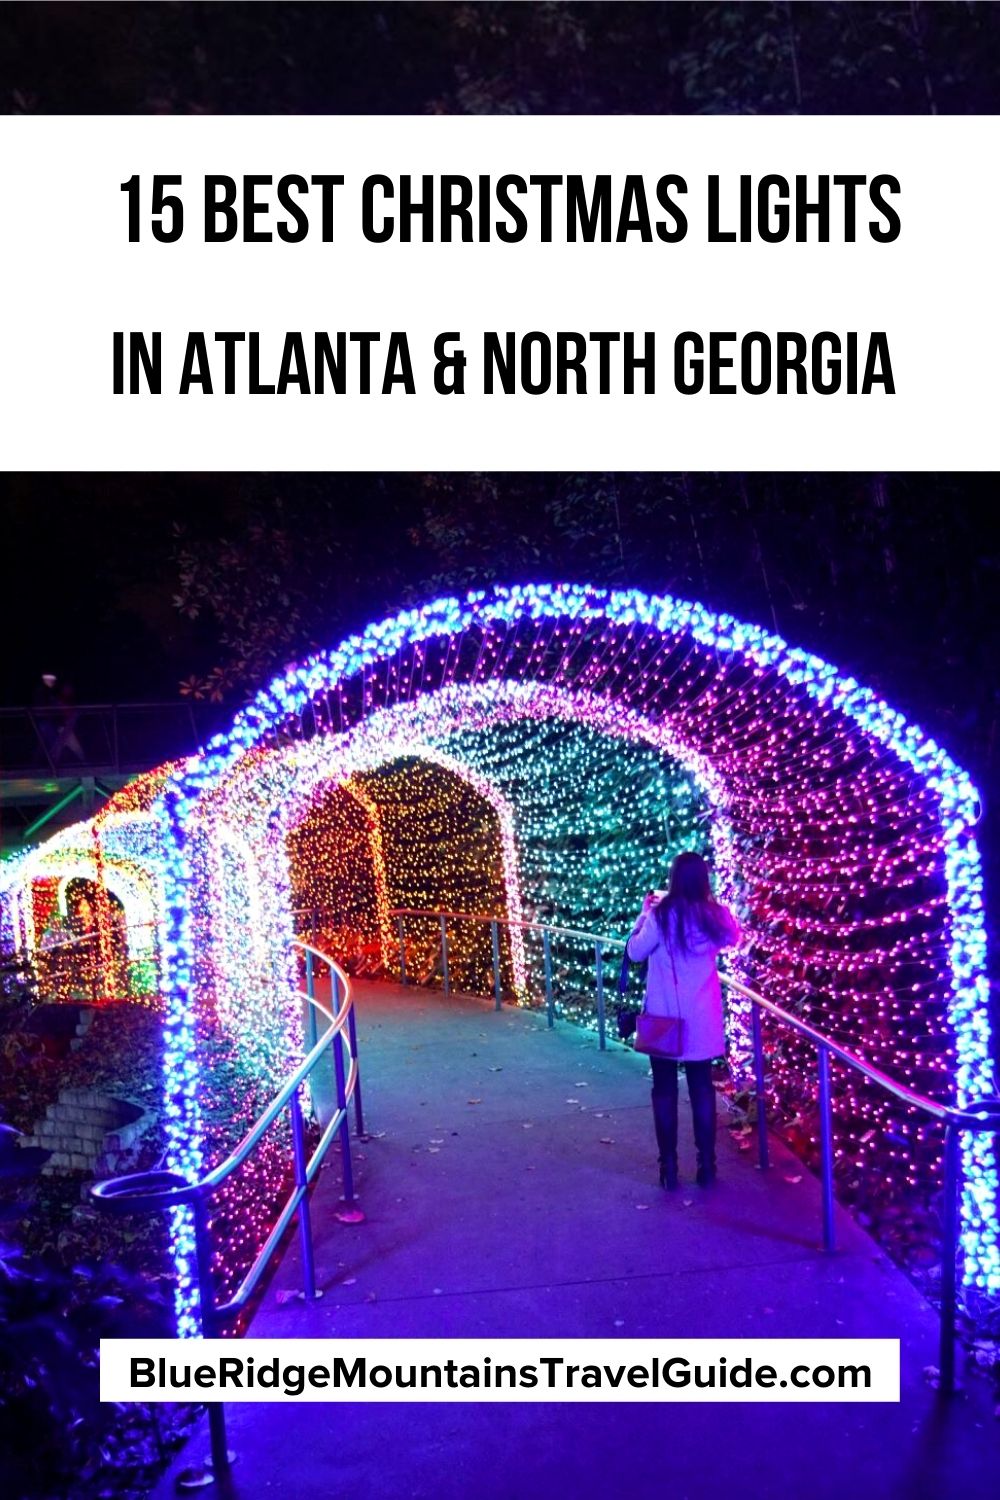 The Best Christmas Lights in Atlanta and North Georgia for 2022